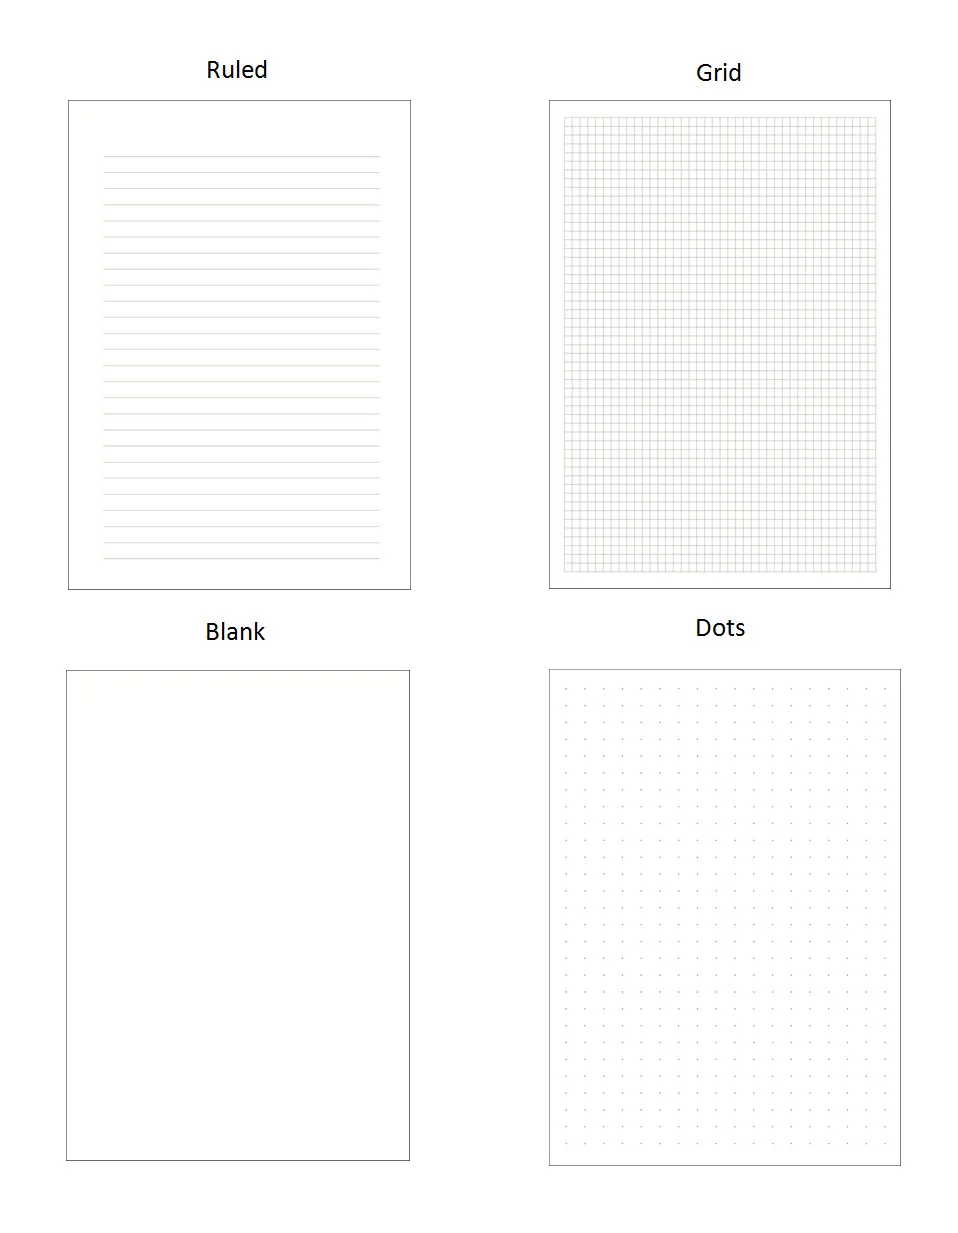 Hot Selling A5 Hard PP PVC Plastic Cover Spiral Notebook With Dot Gird Pages